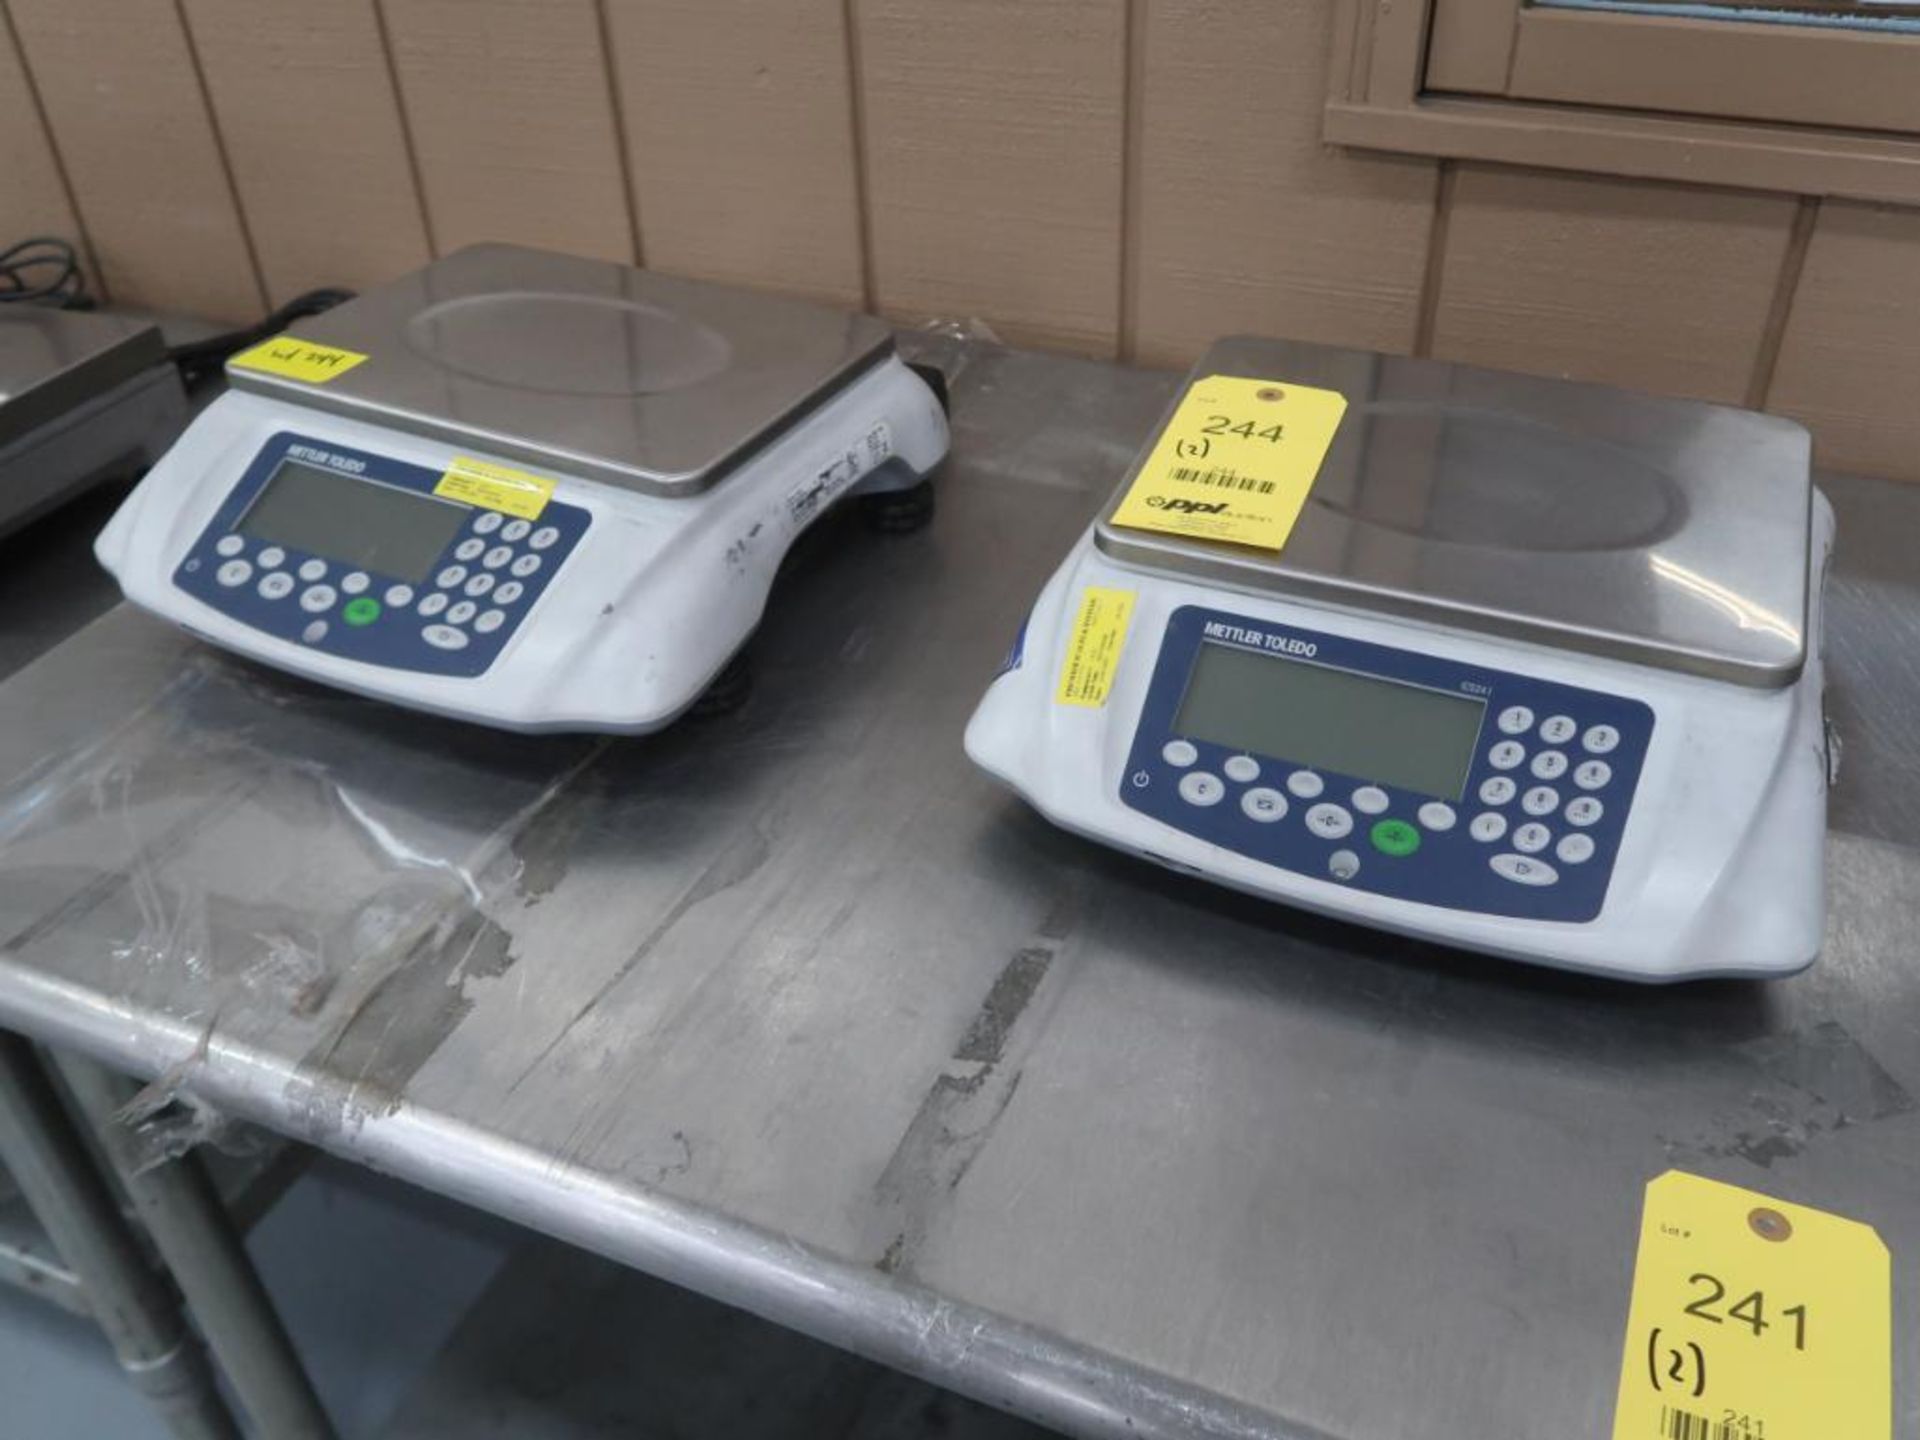 LOT: (2) Mettler Toledo ICS241 Counting Scale (LOCATION: 39 PEARCE INDUSTRIAL RD., SHELBYVILLE, KY